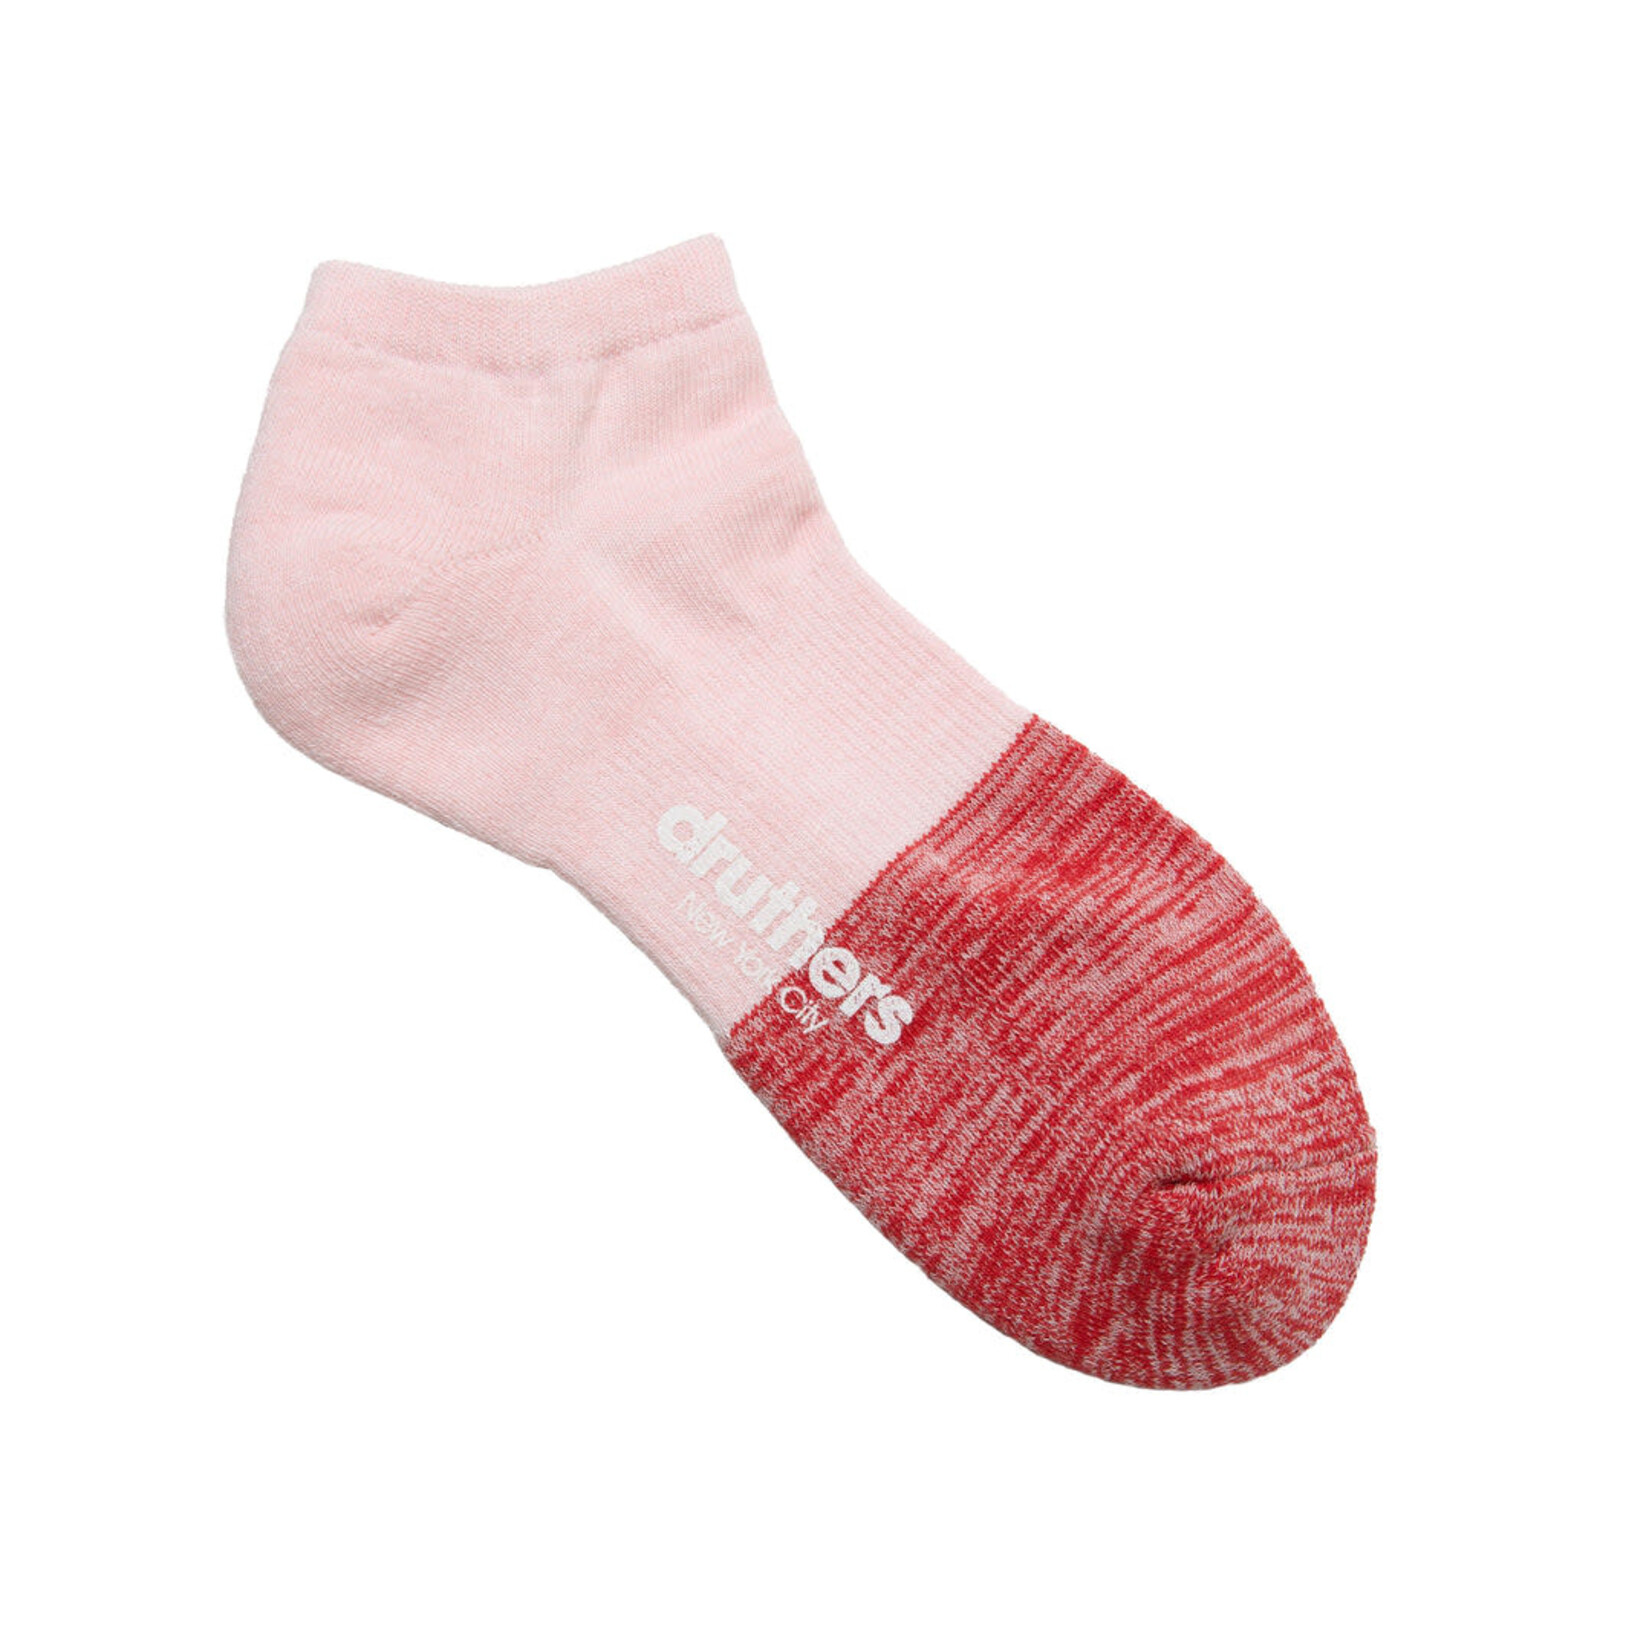 Druthers NYC Druthers Organic Cotton Everyday Blocked Ankle Sock Bubble Gum